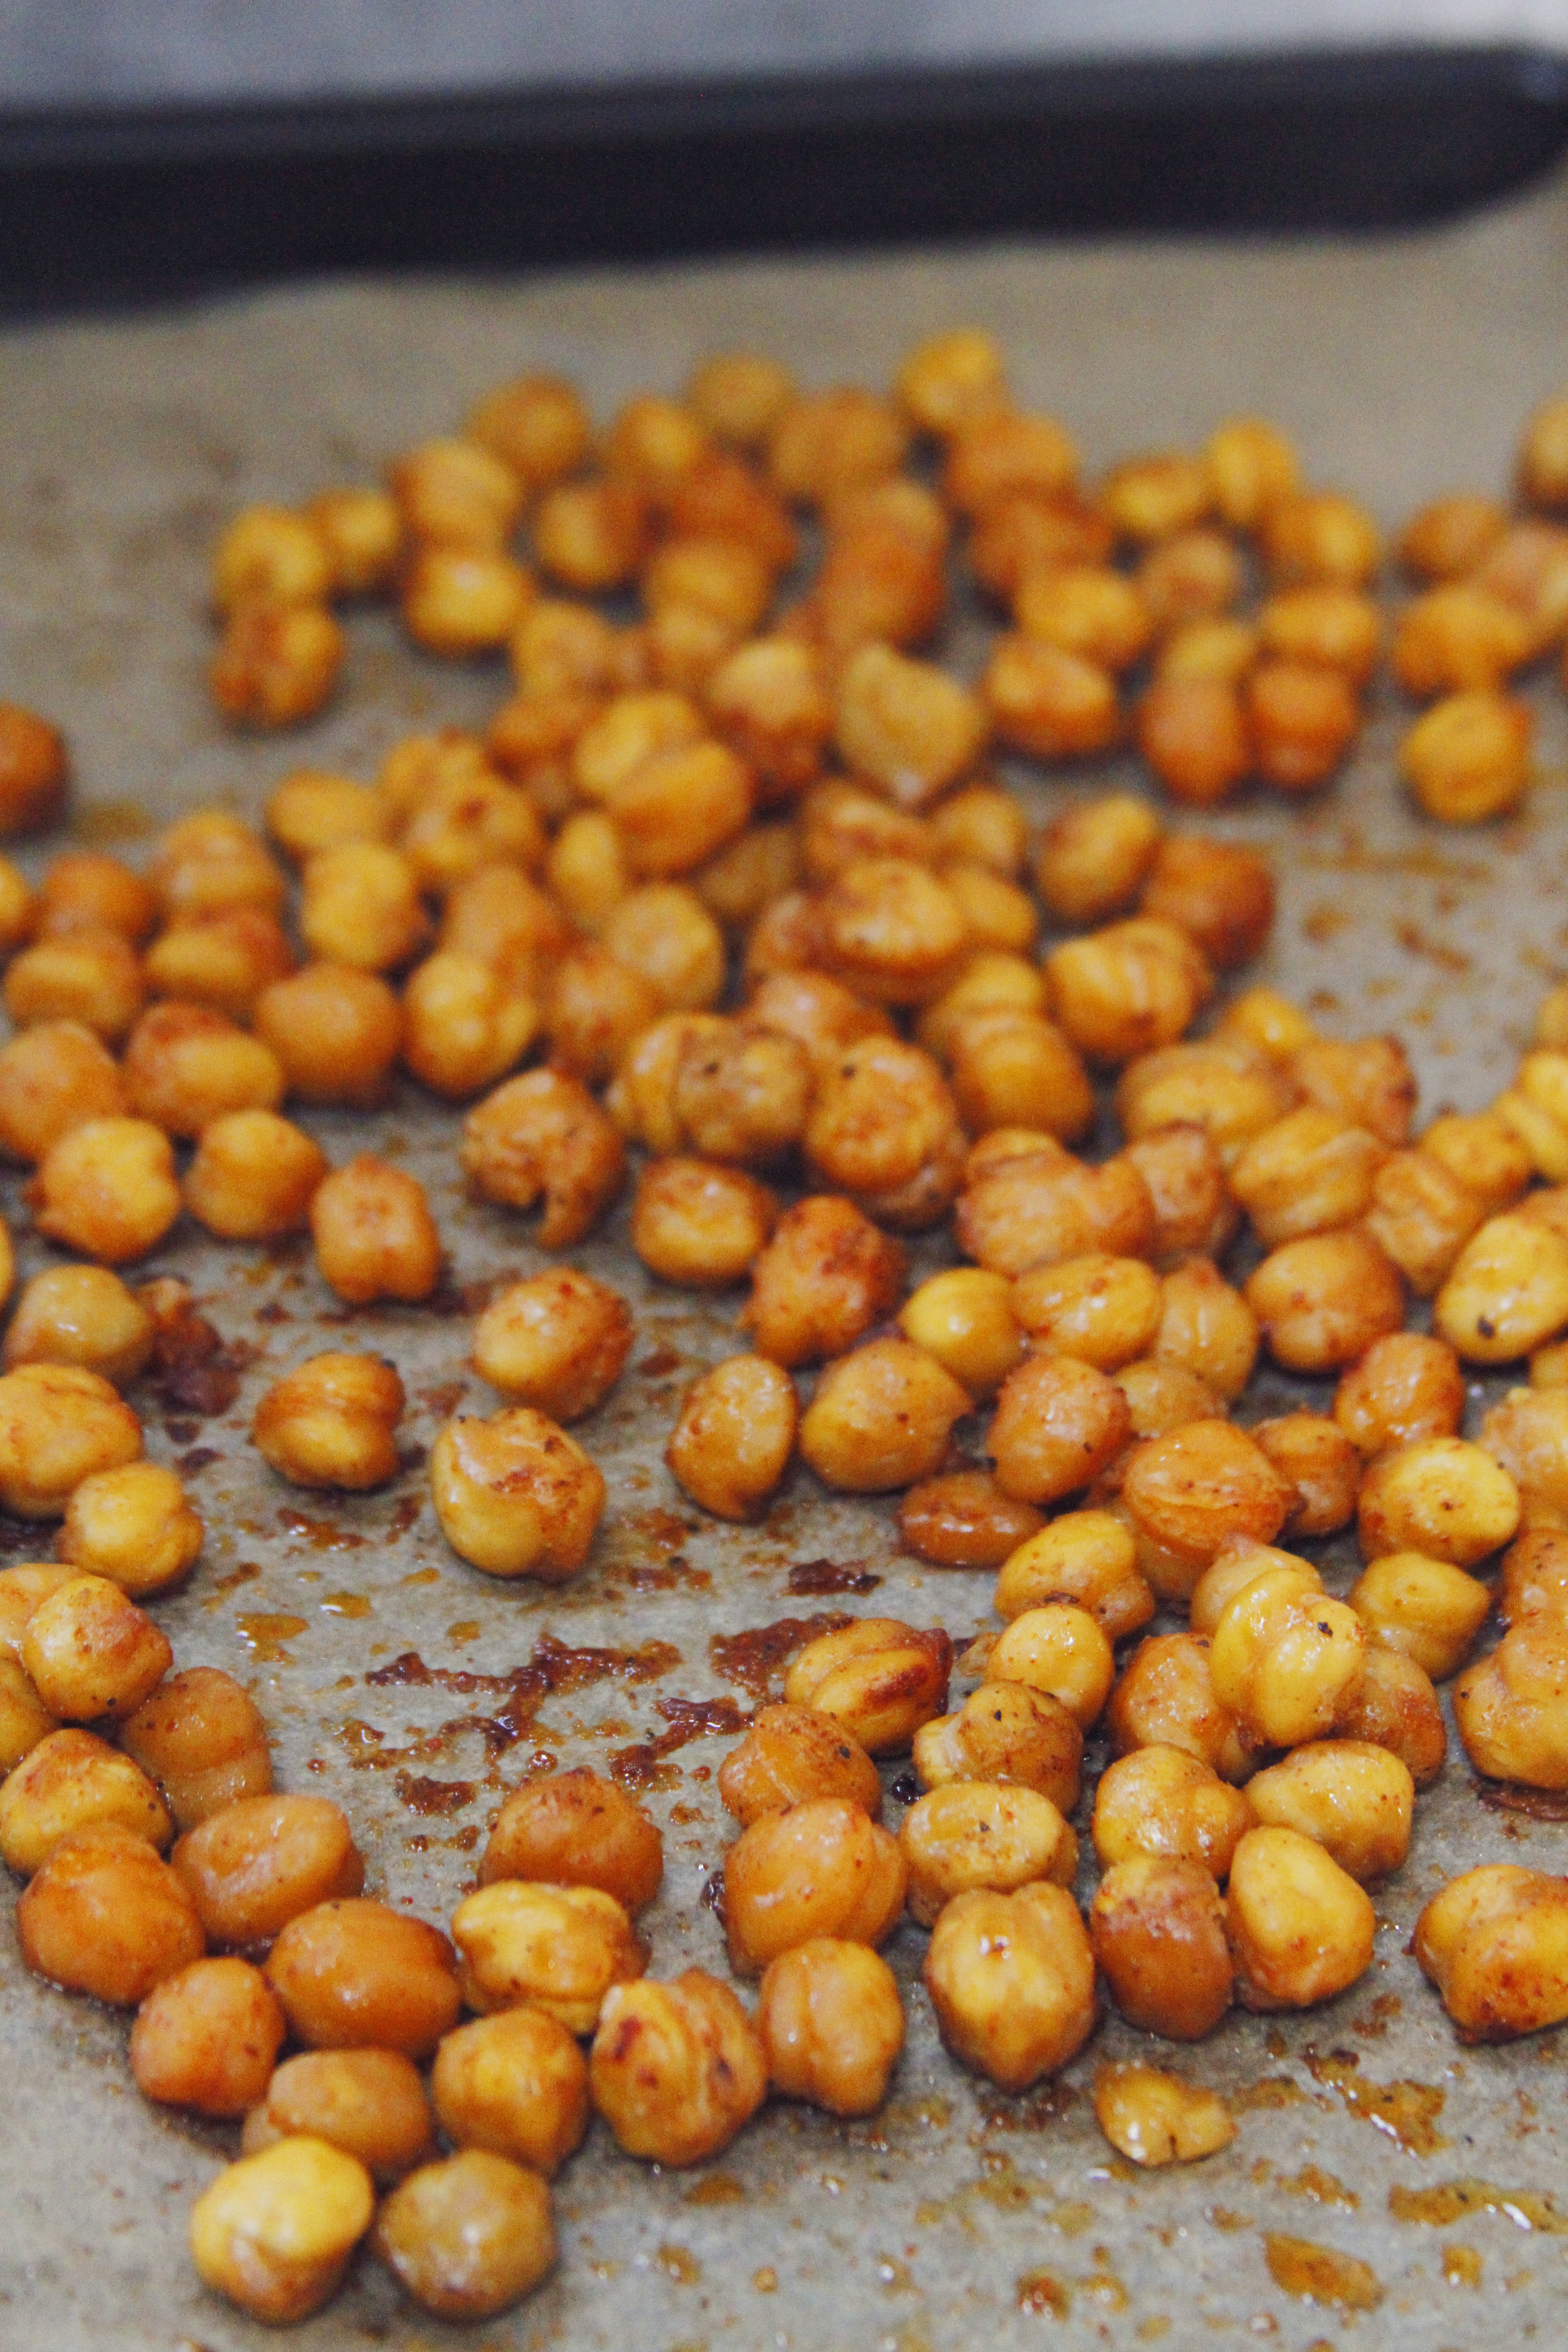 Spicy baked chickpeas // Print (Em) Shop